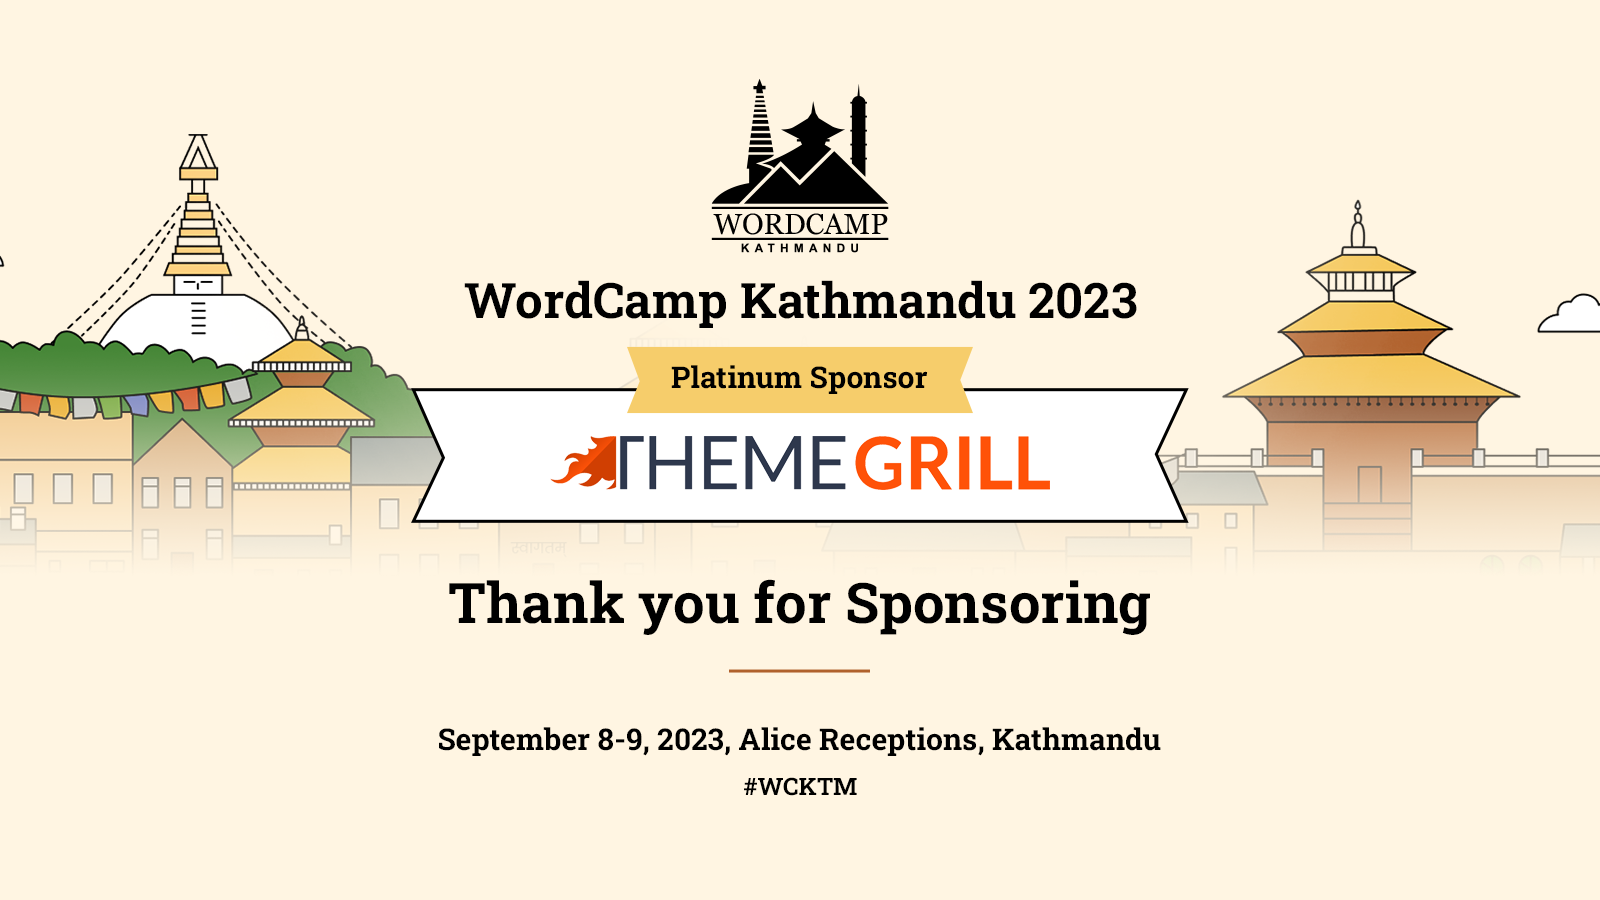 Thank you ThemeGrill for sponsoring